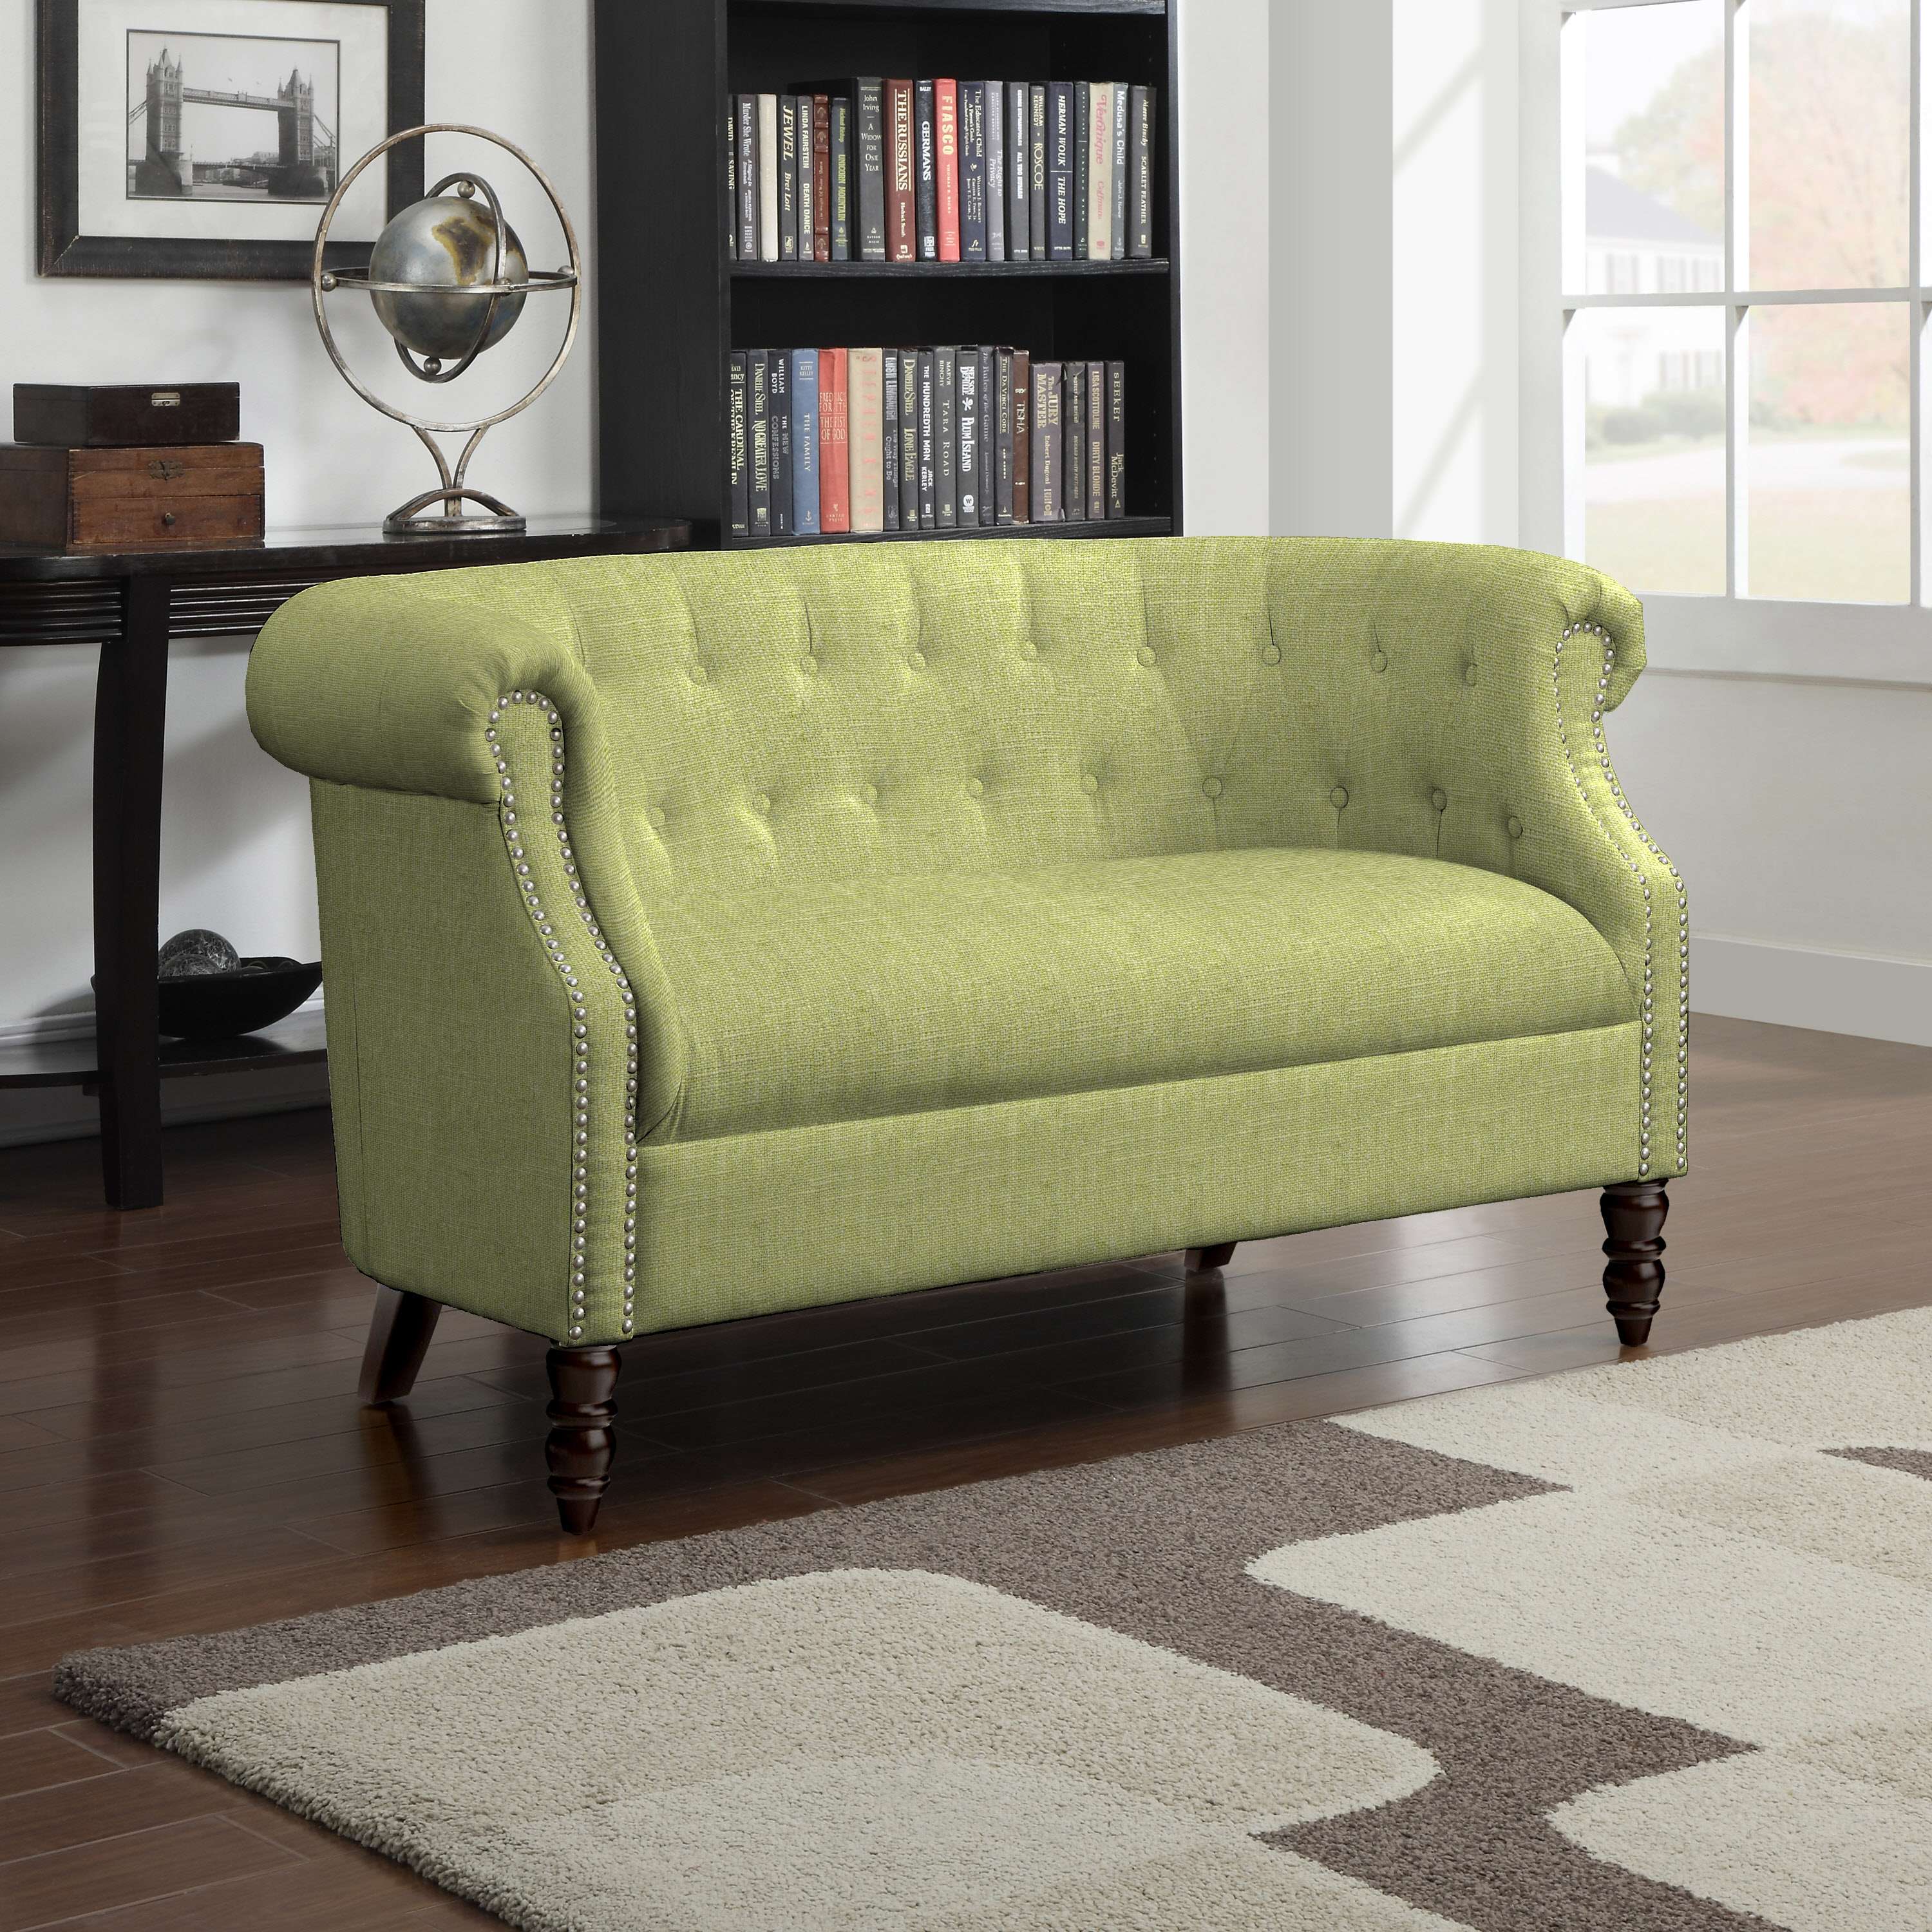 Pantone (sofa, above) believes pops of verdant hues in the home help us reconnect with nature.